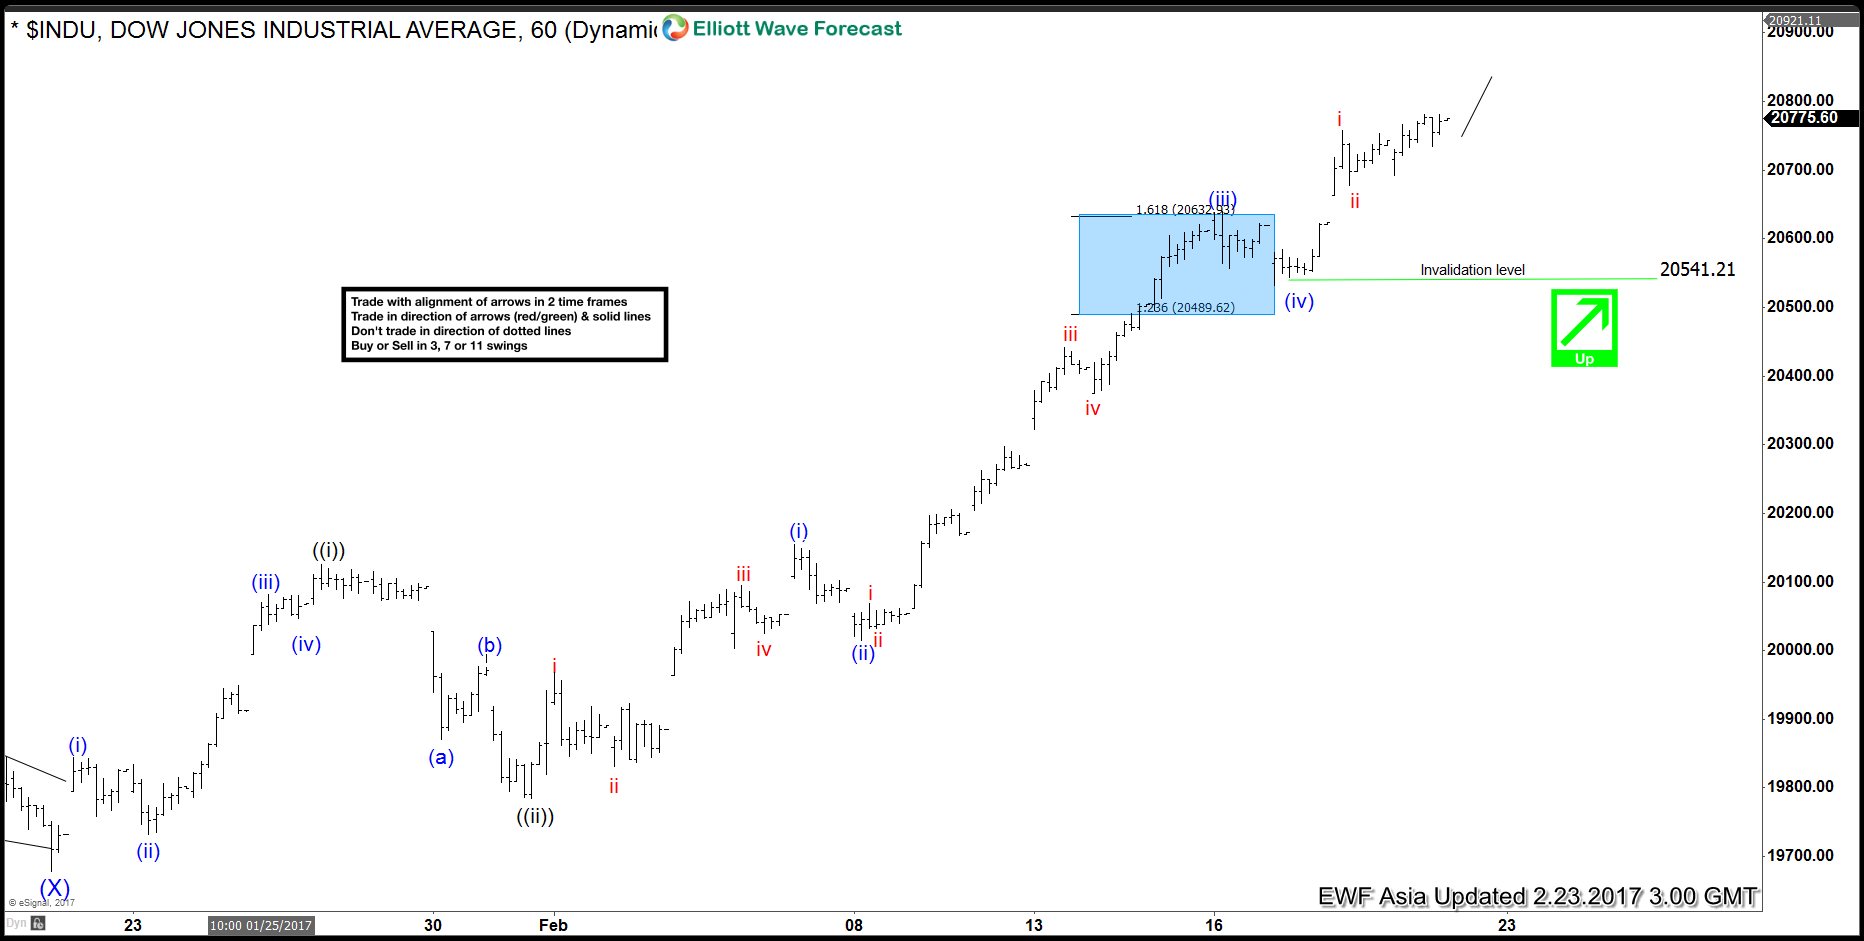 DJIA Elliott Wave View: Extension expected